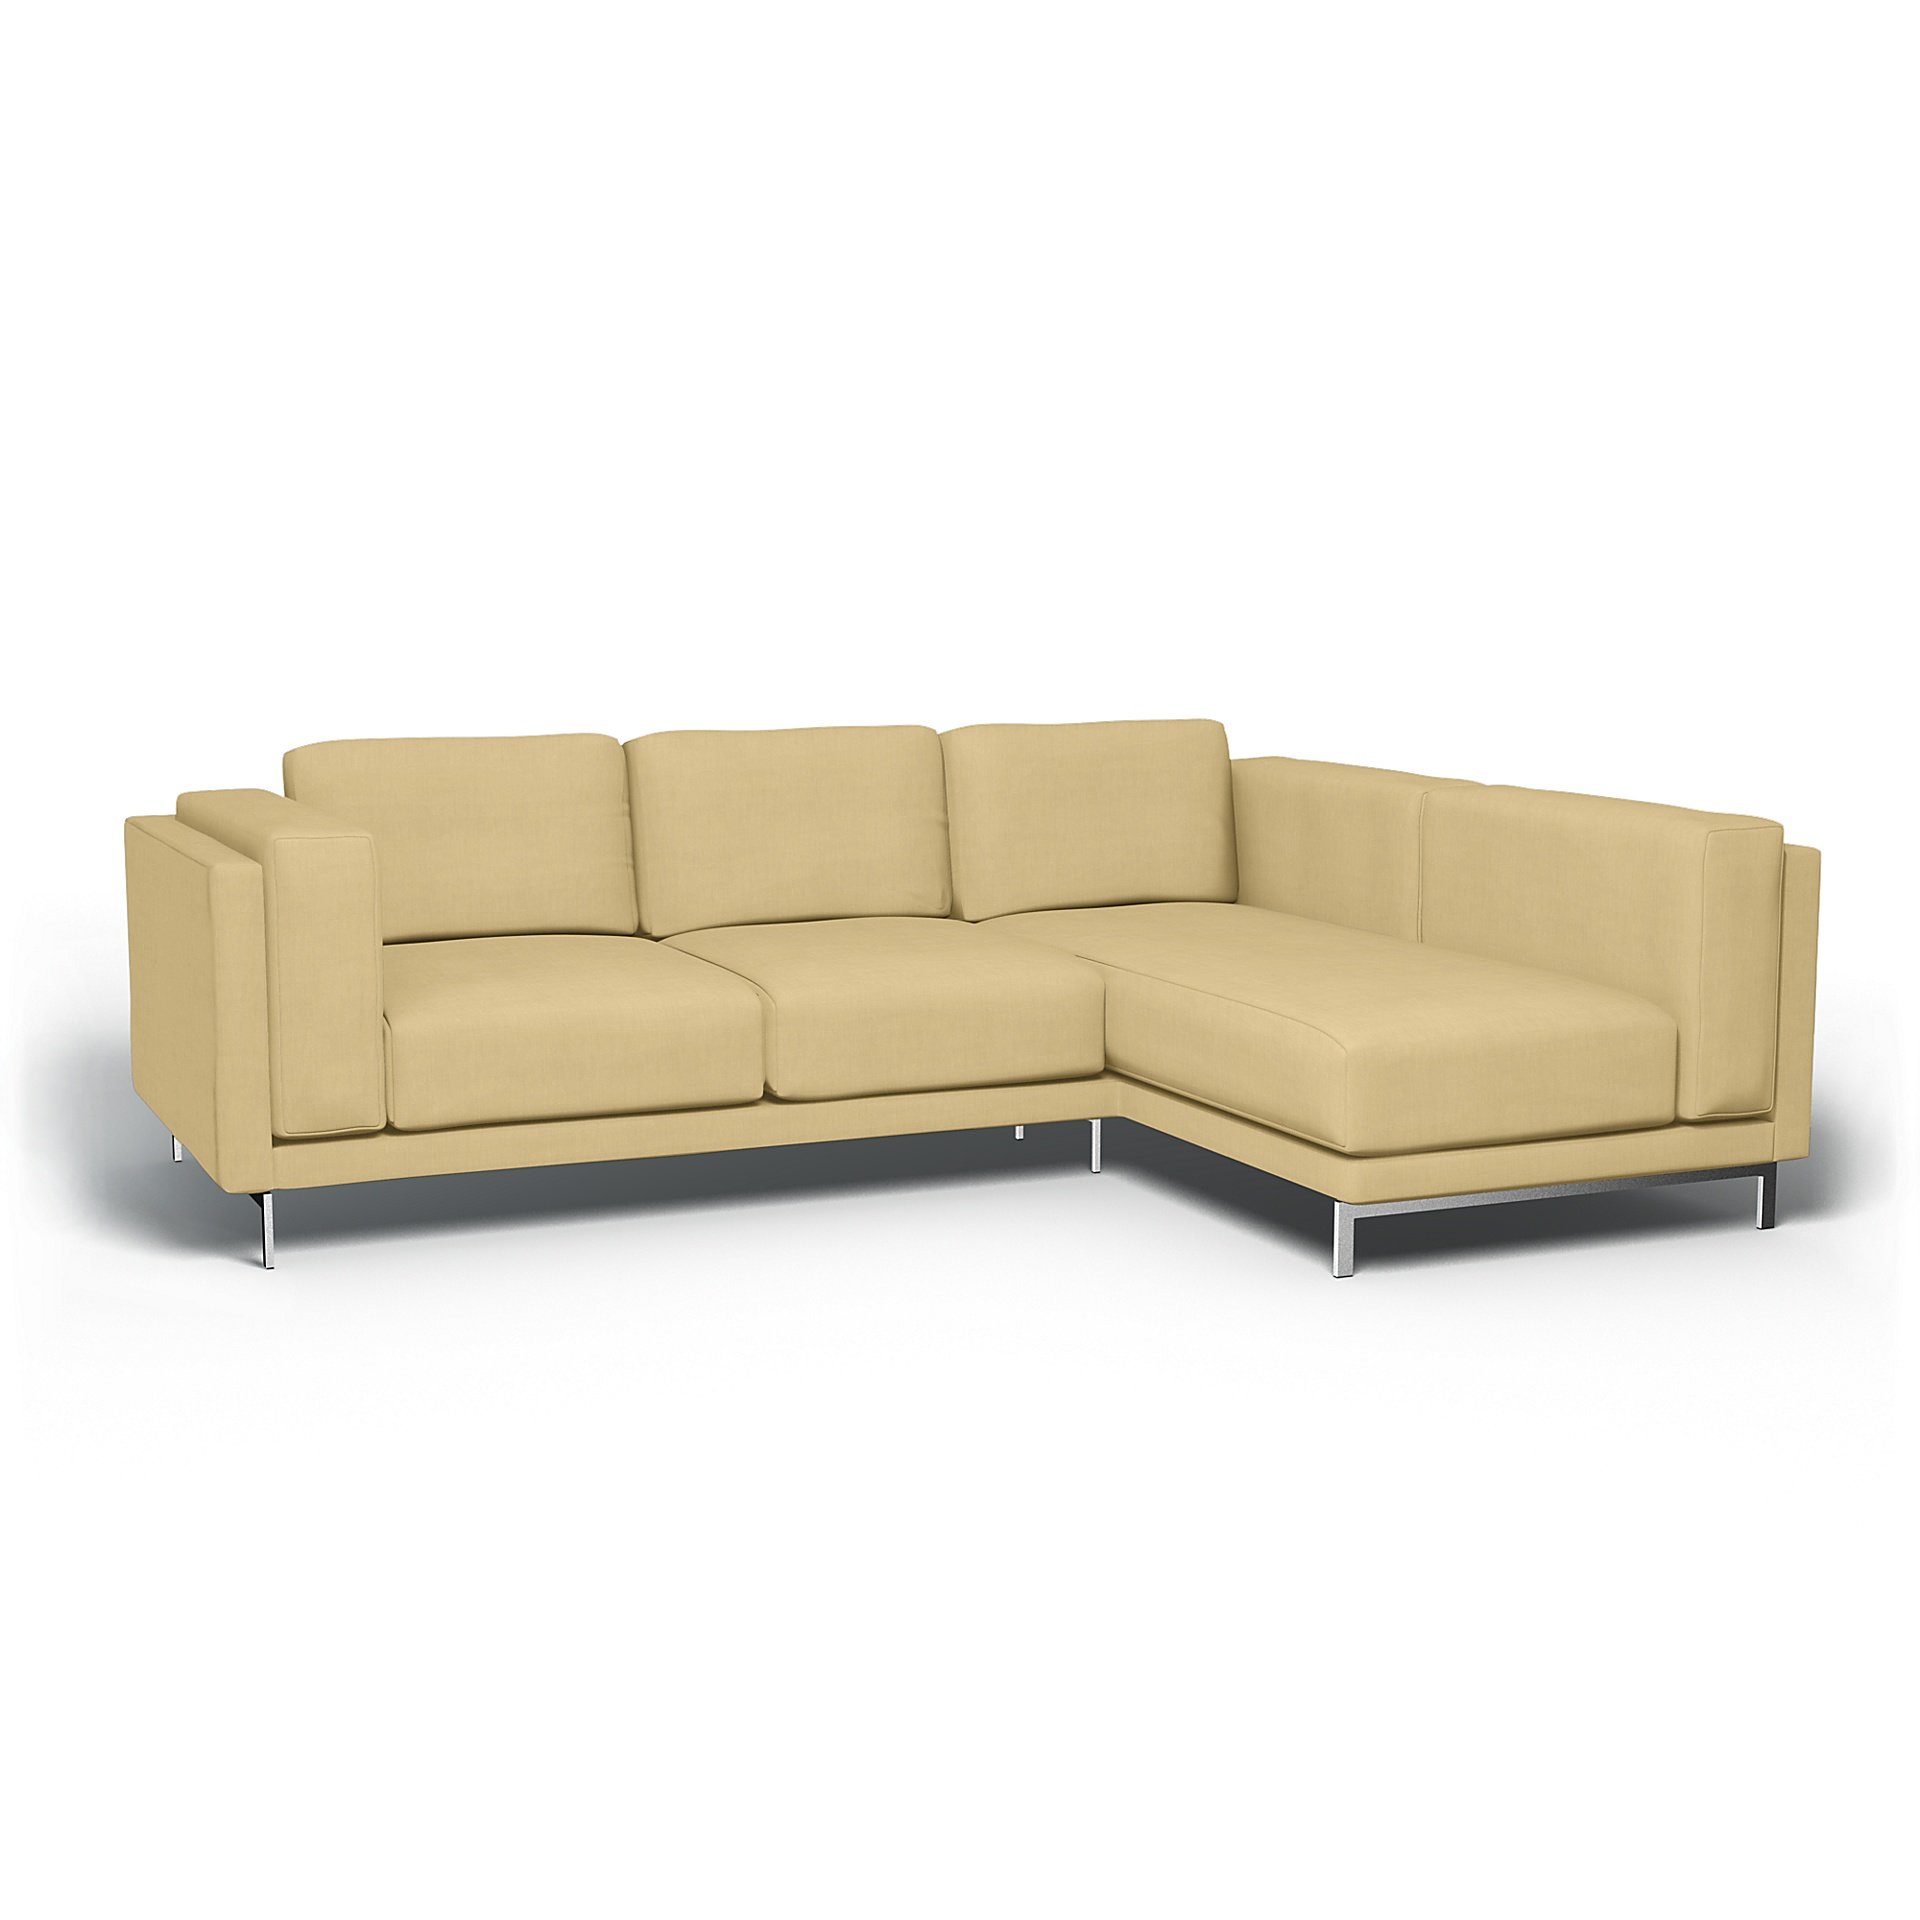 IKEA - Nockeby 3 Seat Sofa with Right Chaise Cover, Straw Yellow, Linen - Bemz